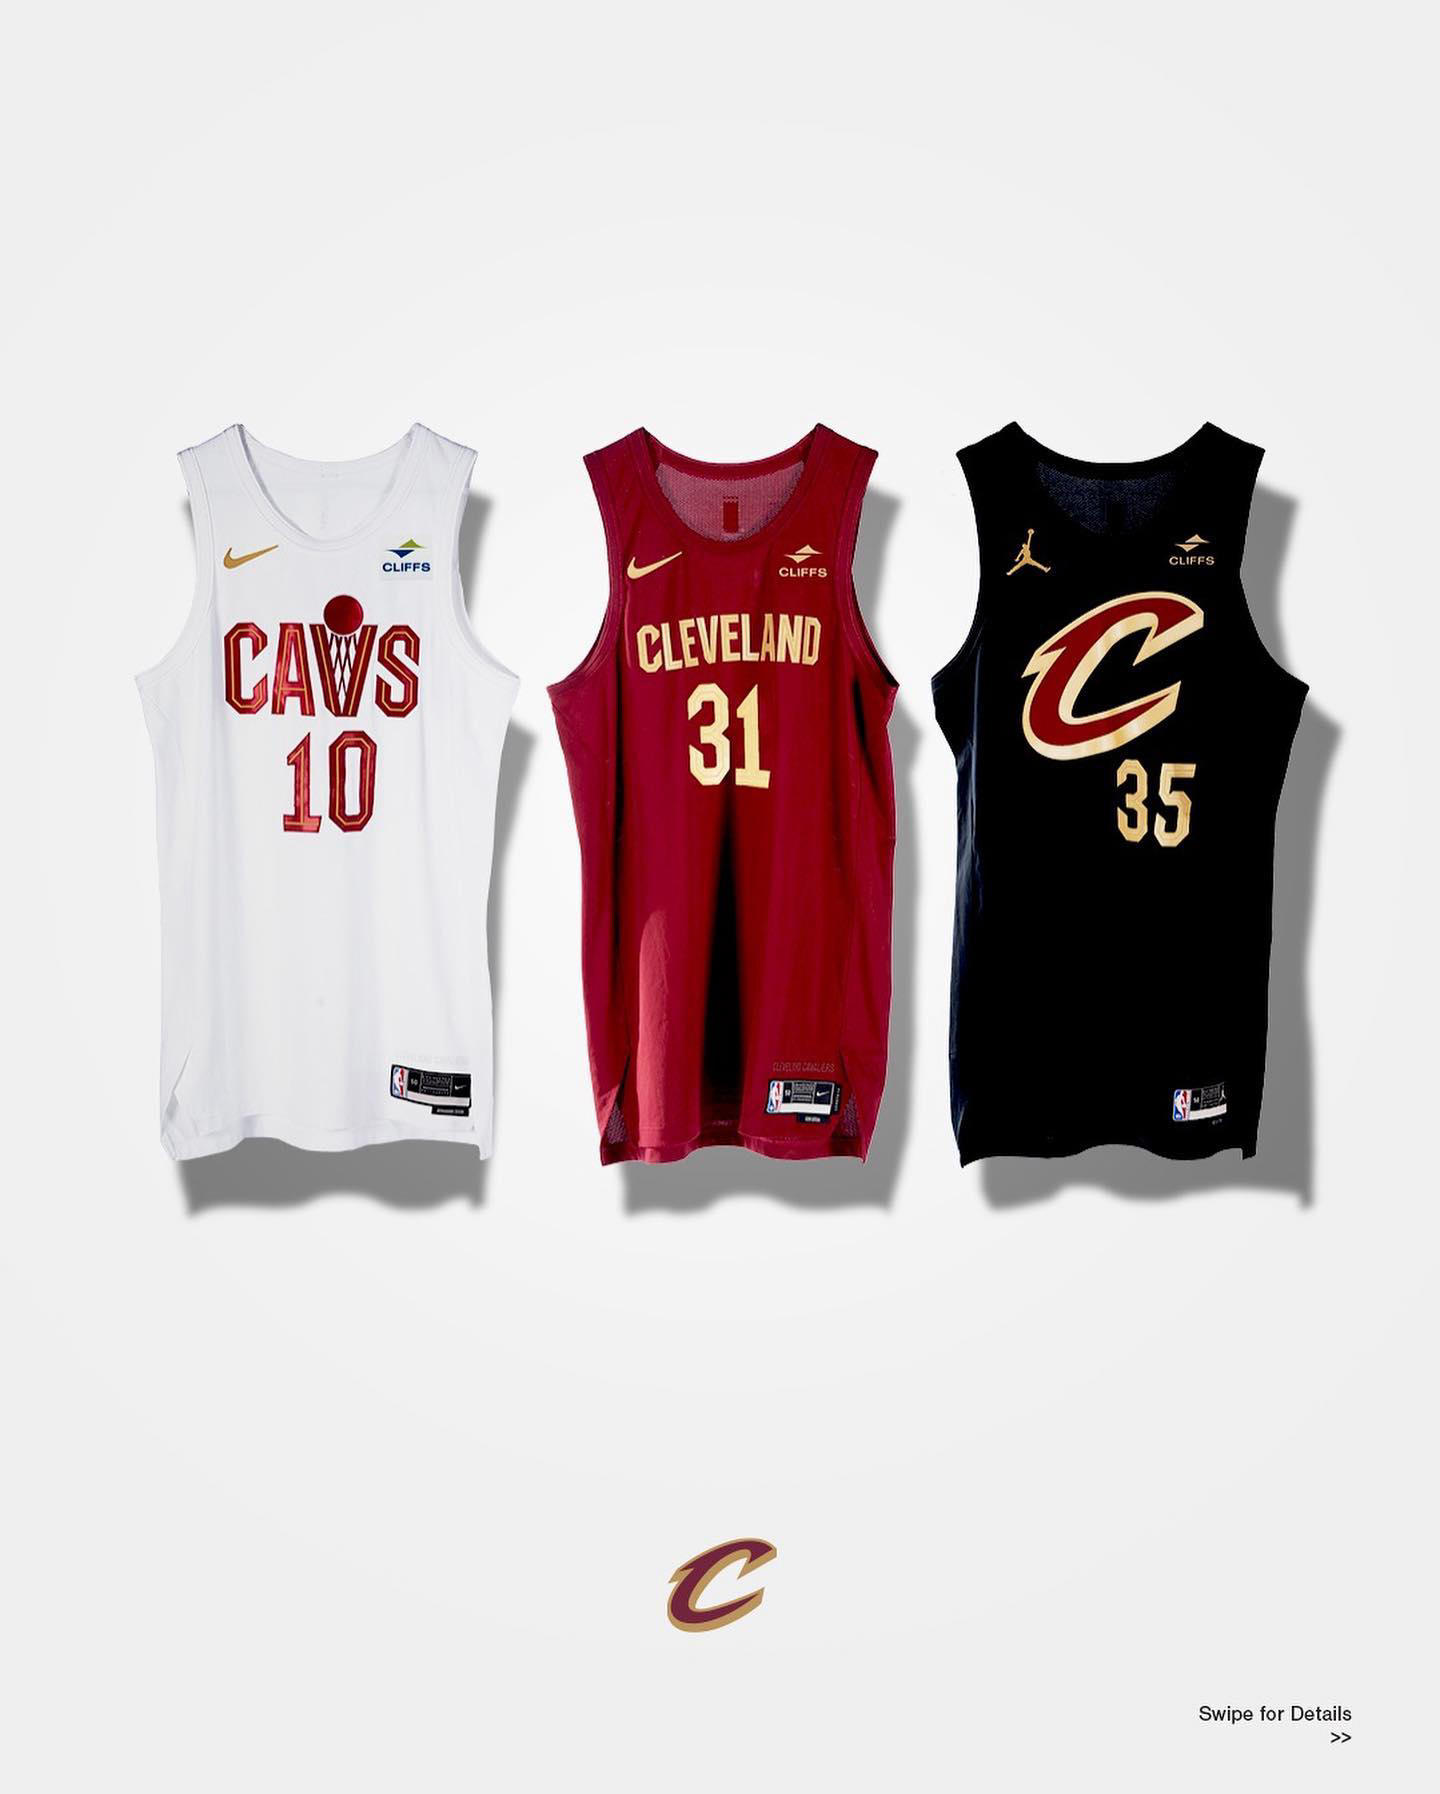 Cleveland Cavaliers - The new threads